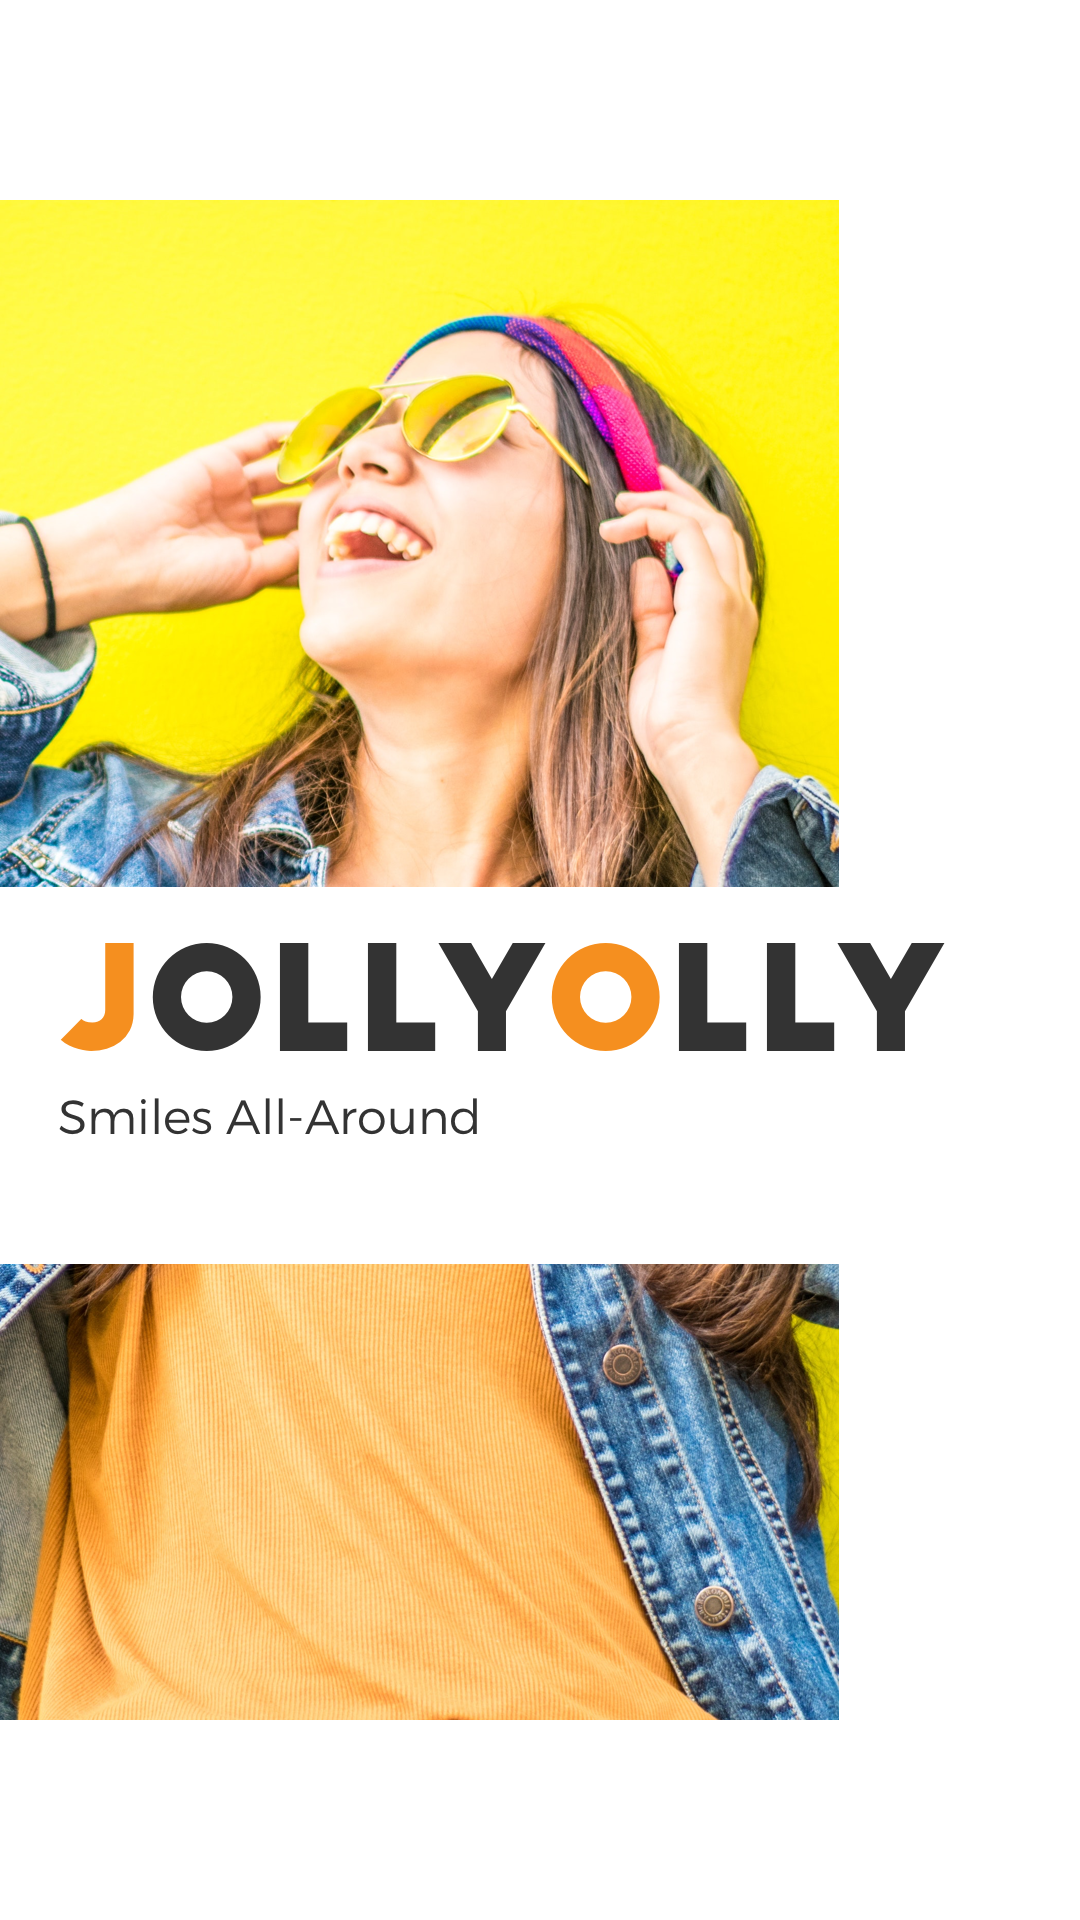 Instagram story template for design Jolly Olly. Cover image with featured image, title and slogan. By Katherine Delorme.